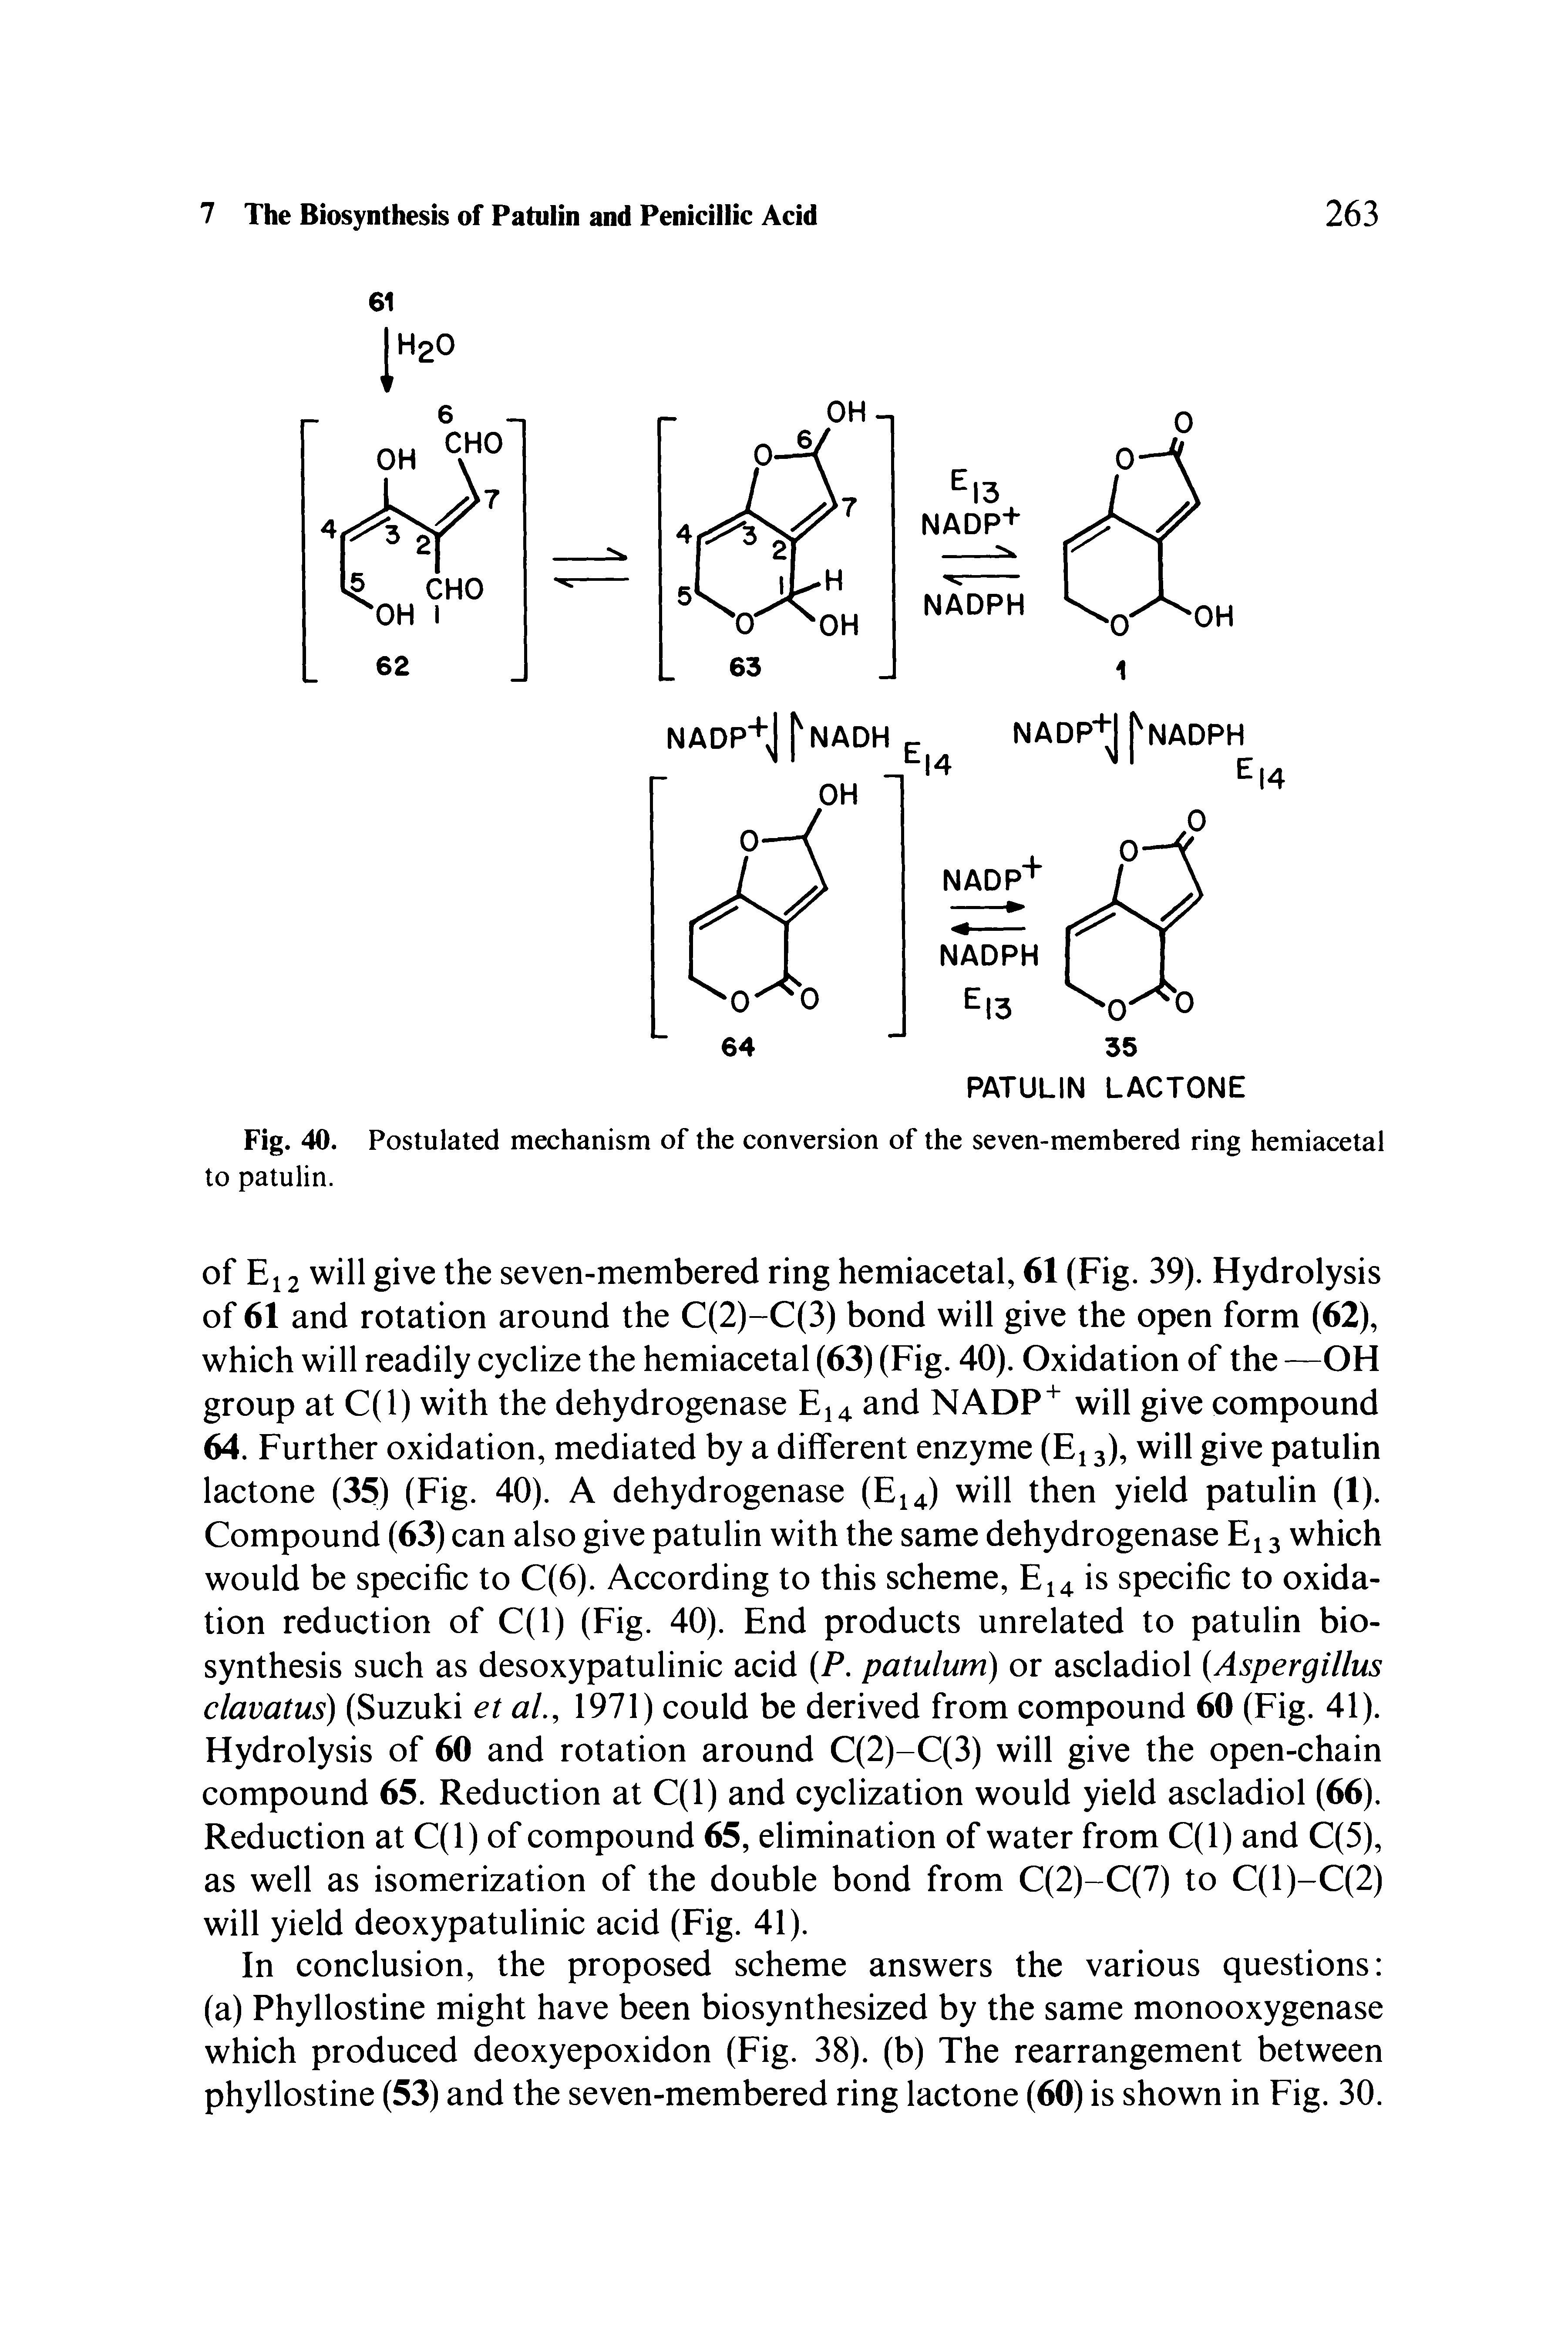 Fig. 40. Postulated mechanism of the conversion of the seven-membered ring hemiacetal to patulin.